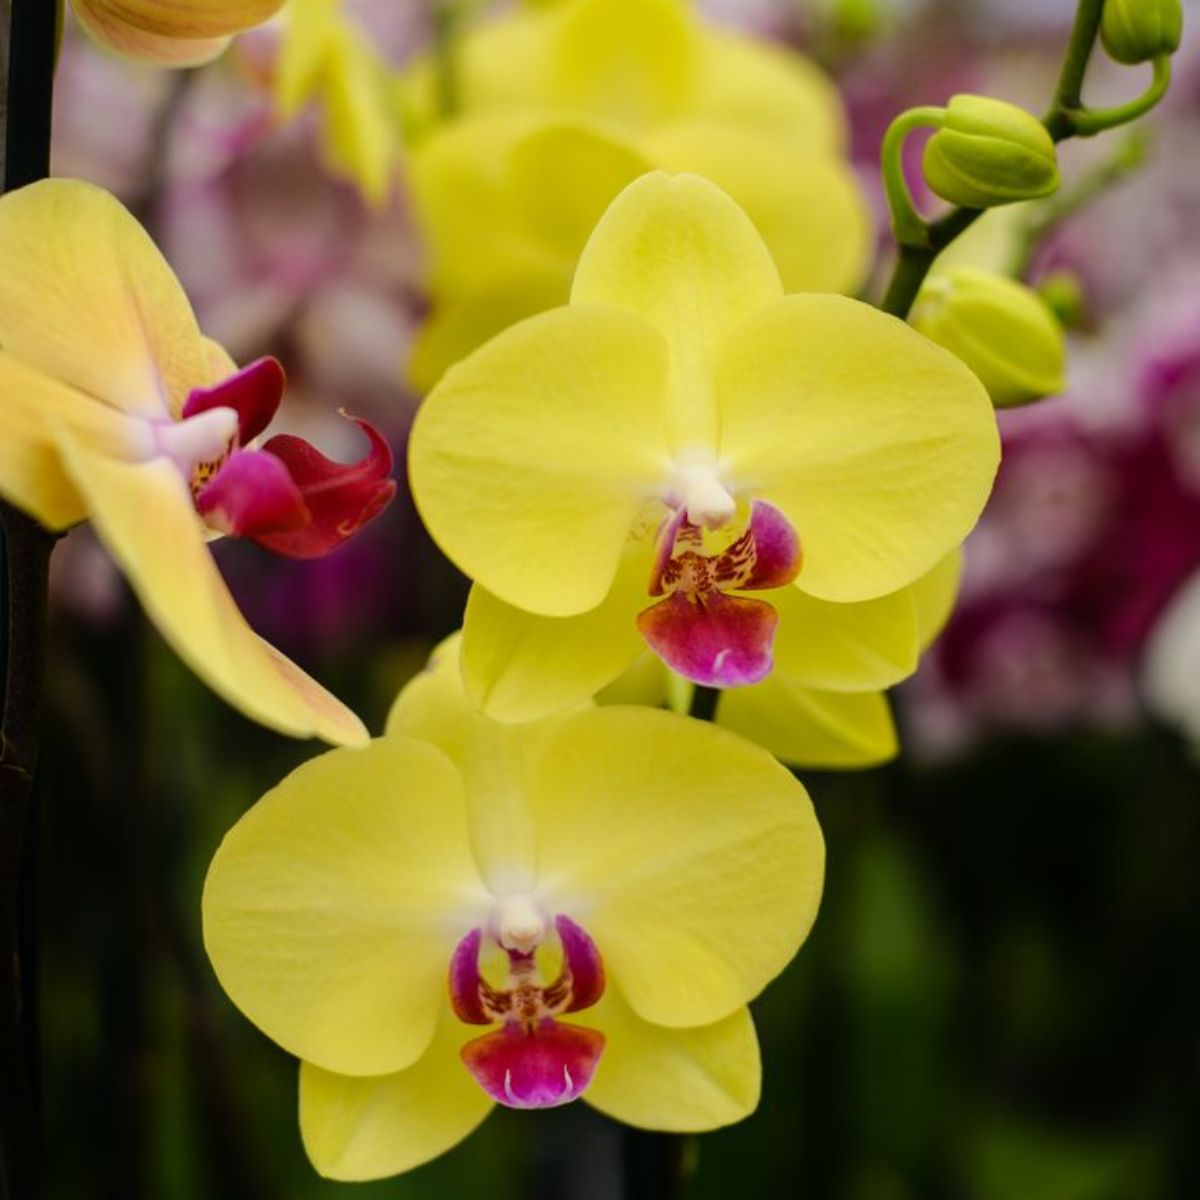 Phalaenopsis Miraflore orchid flower - Exquisite beauty in vibrant colors and delicate petals